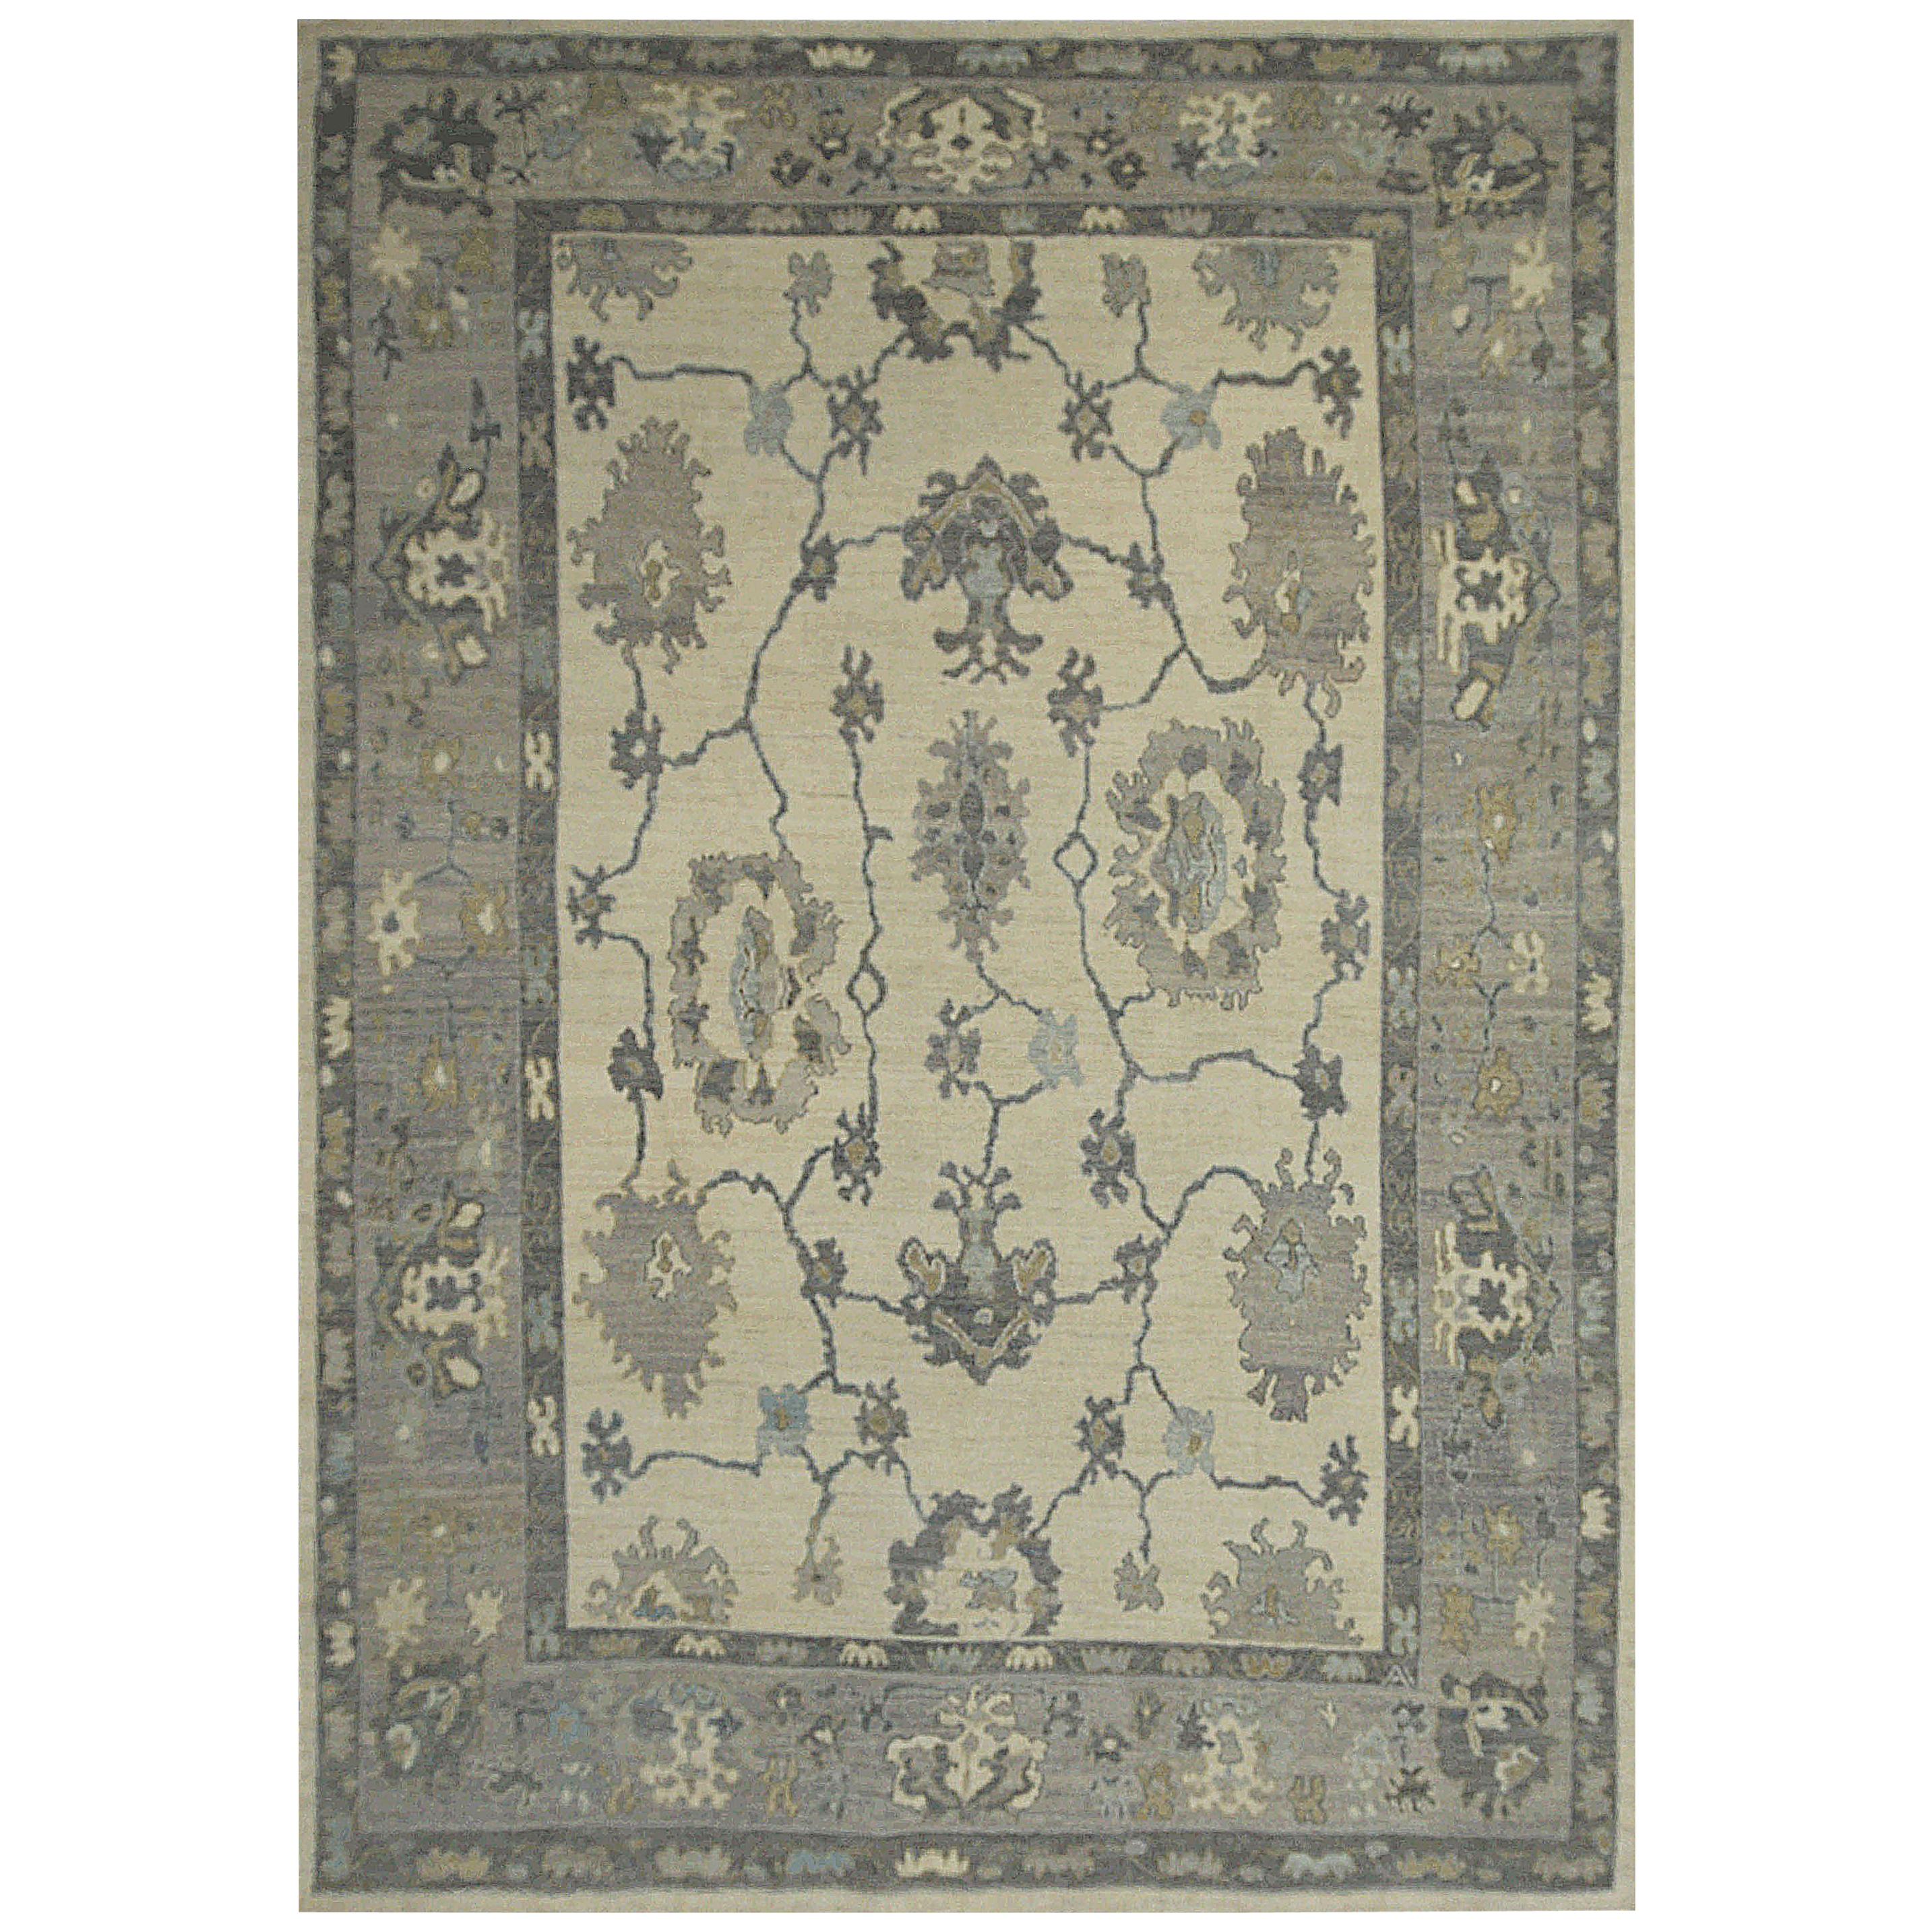 Contemporary Oushak Rug with Floral Patterns in Blue and Gray on Ivory Field